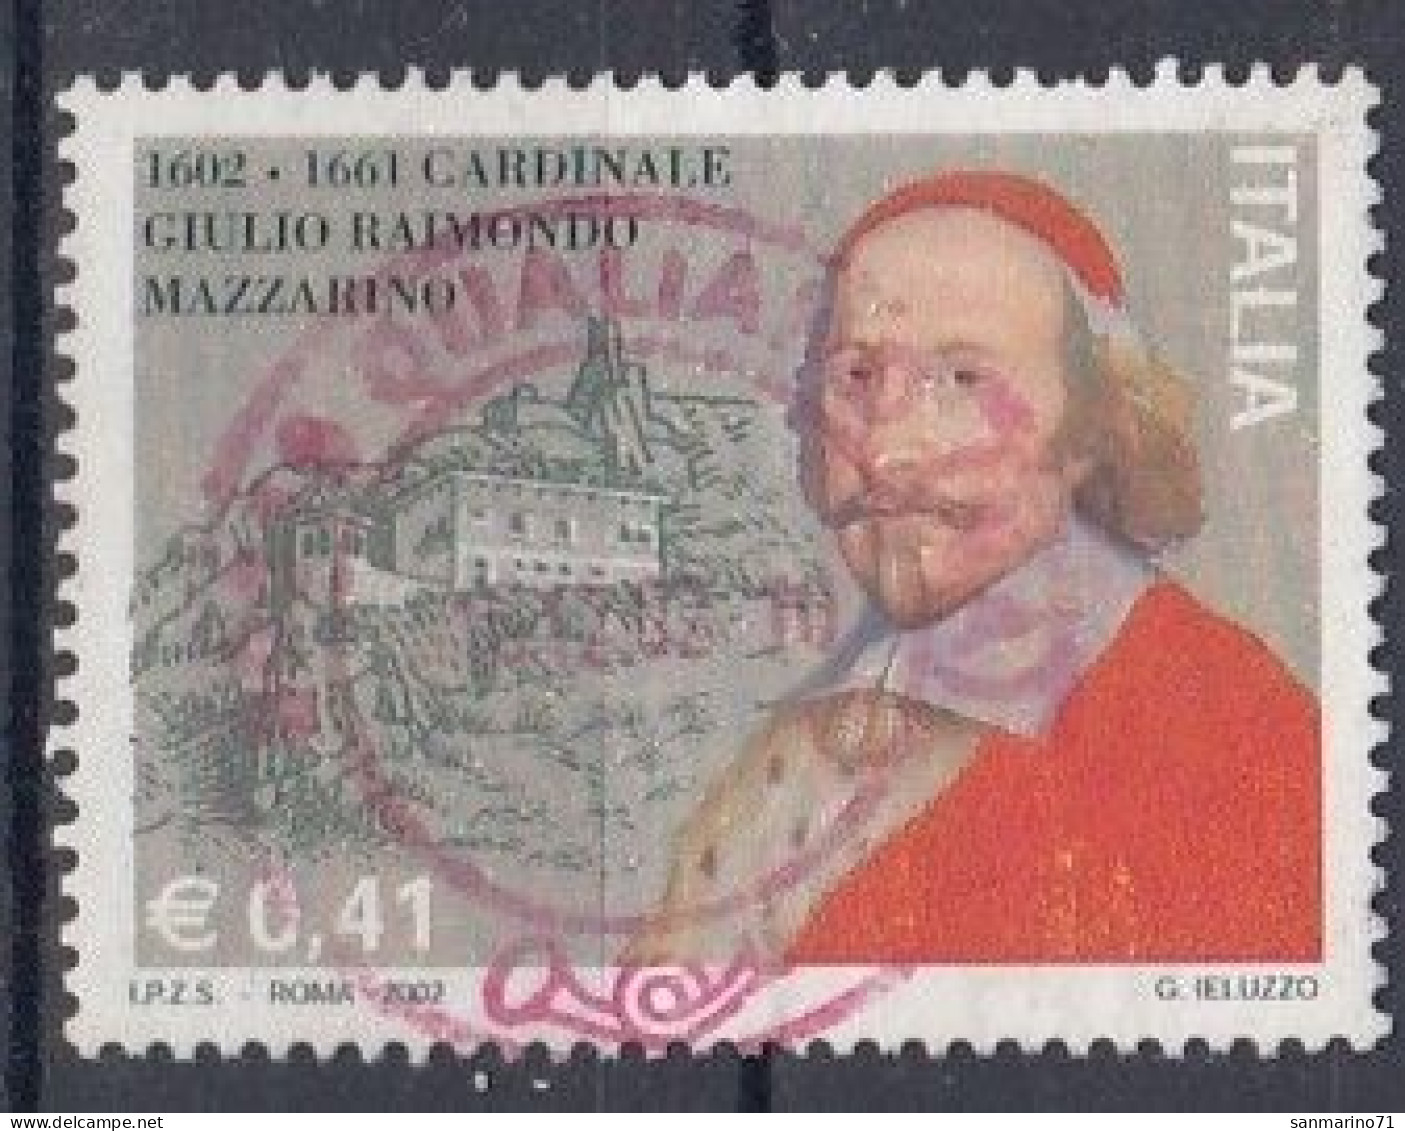 ITALY 2857,used,falc Hinged - 2001-10: Oblitérés